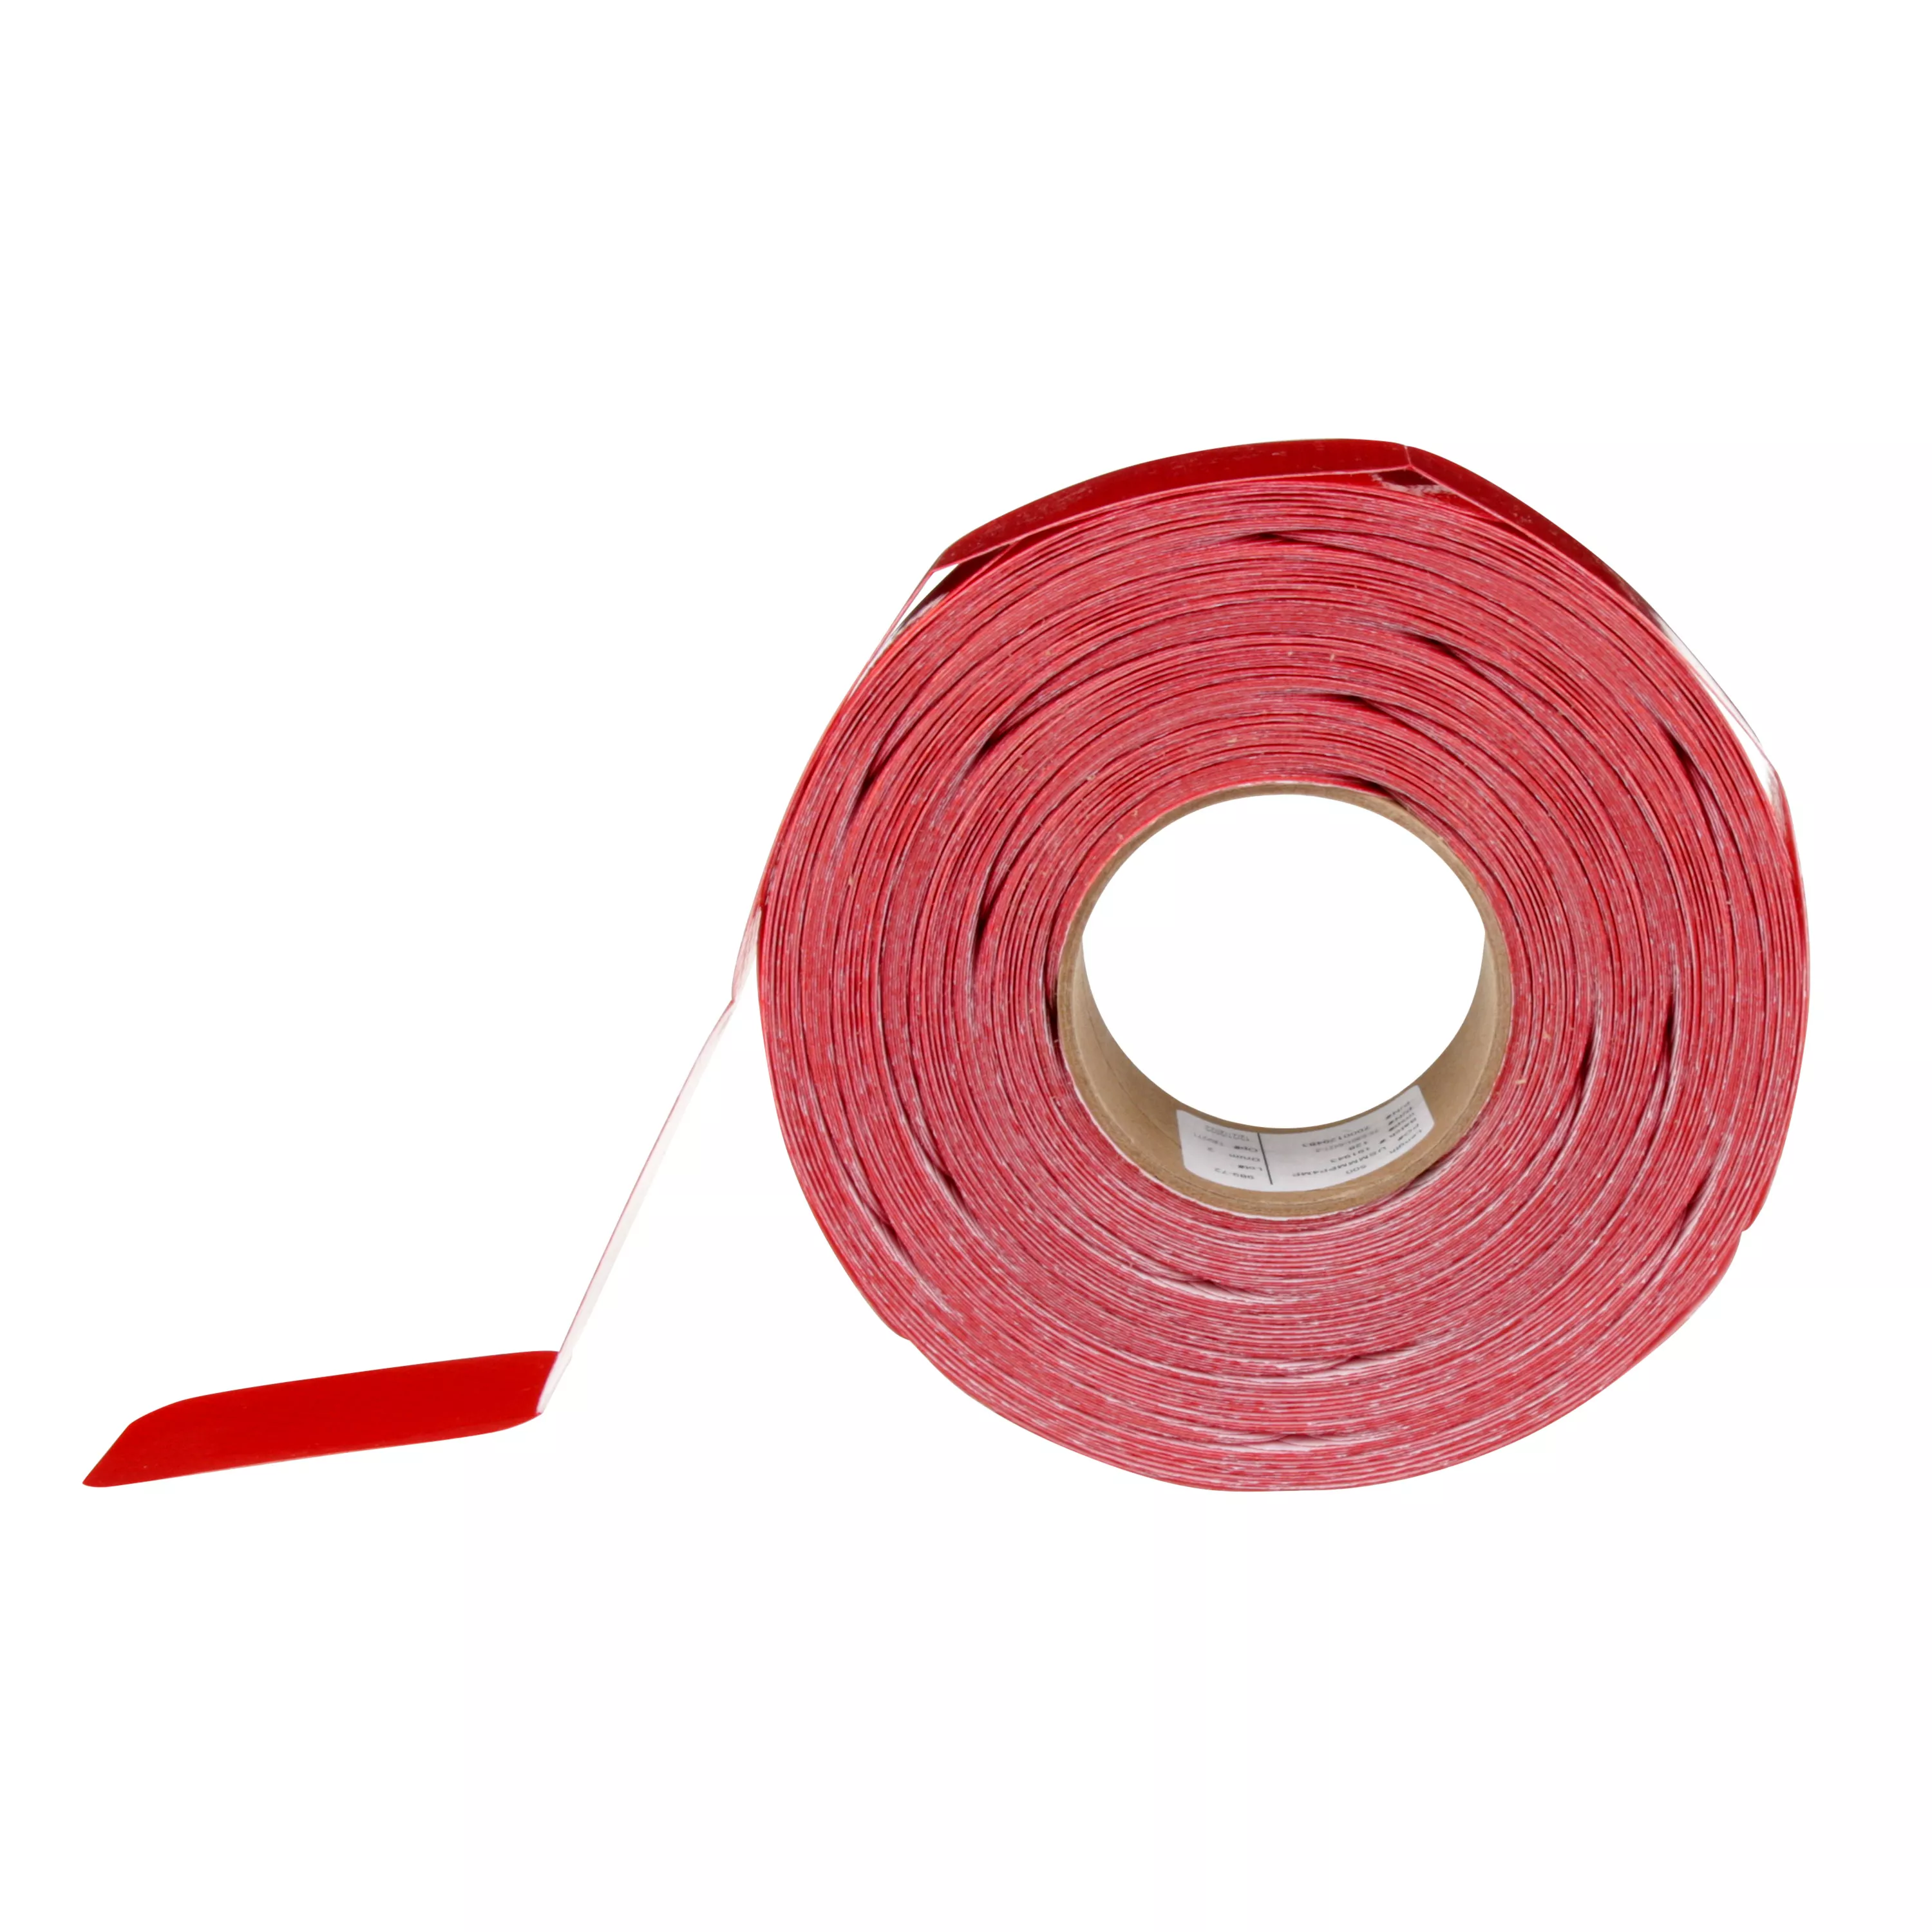 Product Number 989-72 | 3M™ Diamond Grade™ Reflectors 989-72 Red